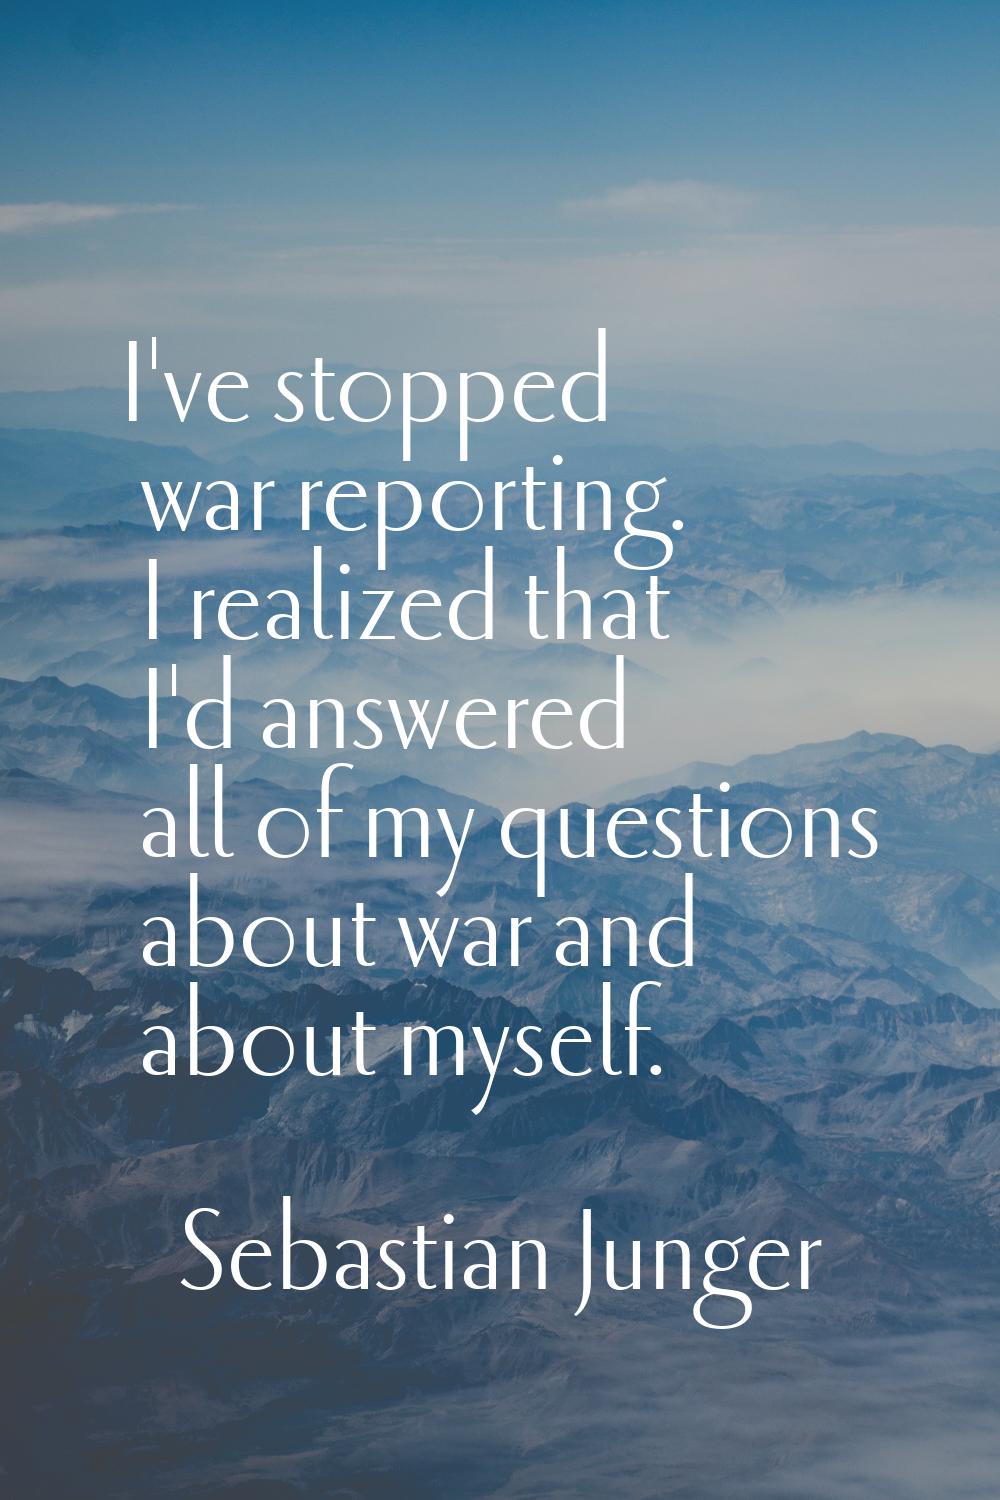 I've stopped war reporting. I realized that I'd answered all of my questions about war and about my